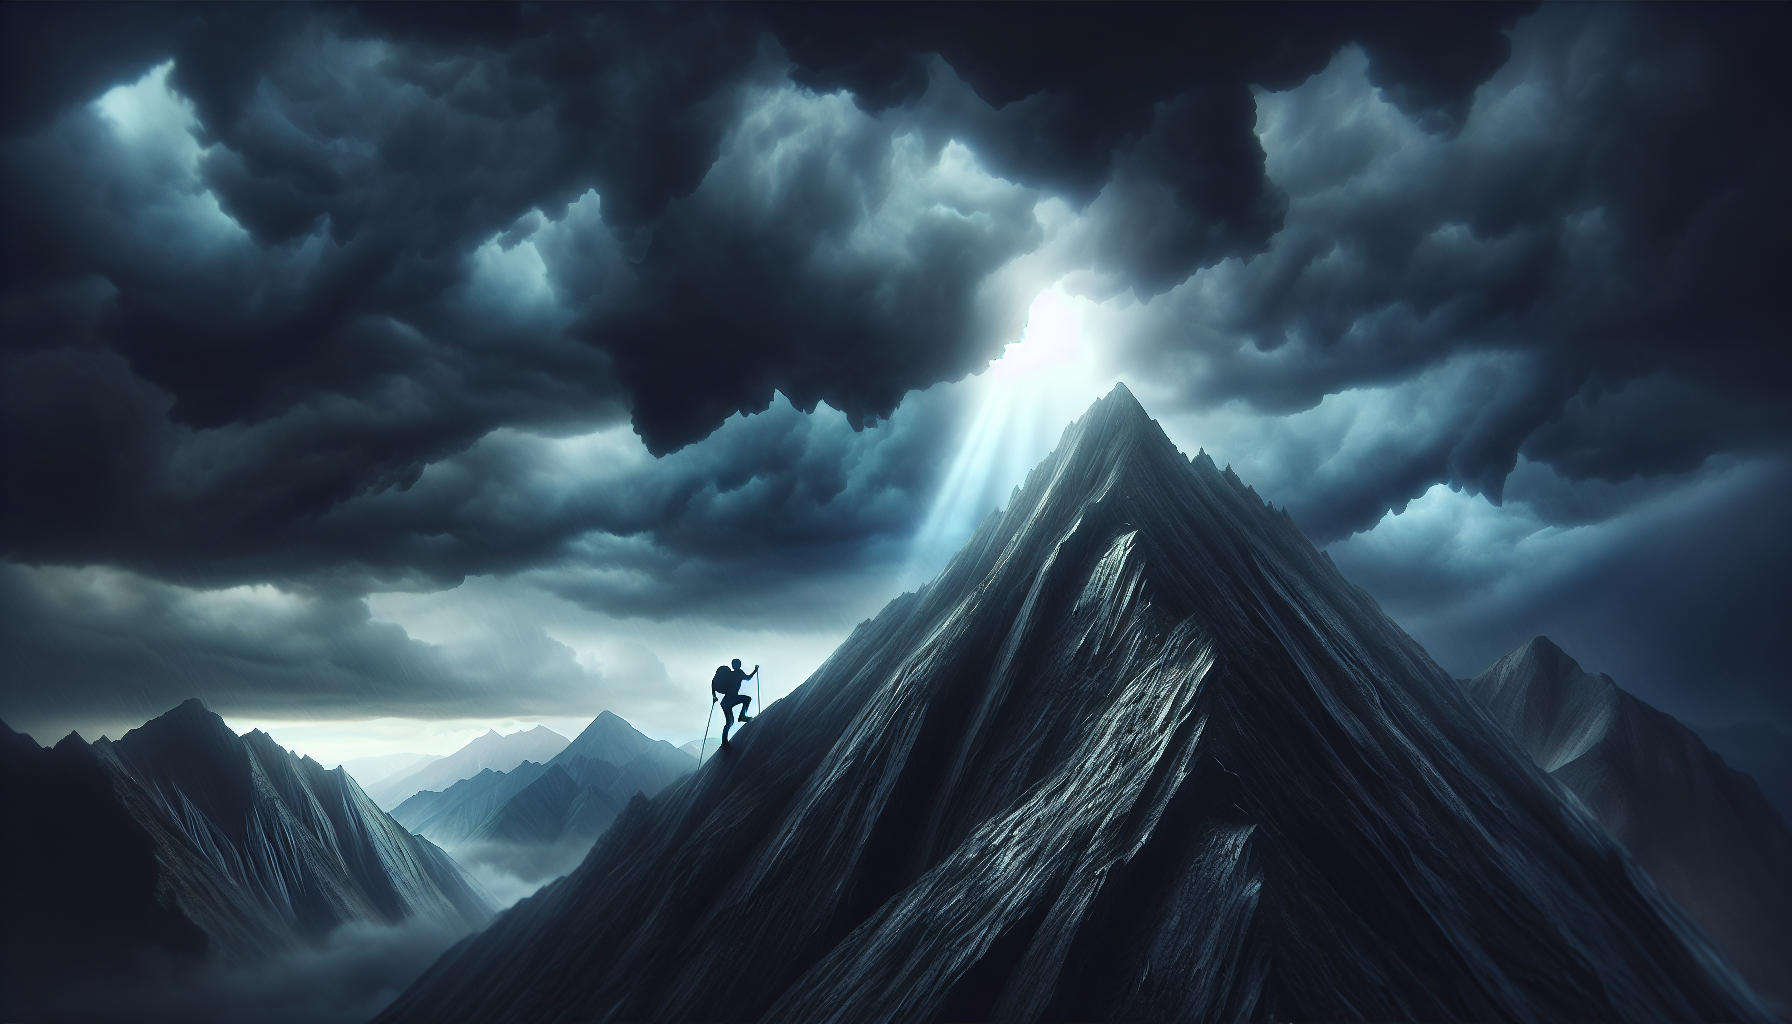 A person climbing a mountain, symbolizing overcoming fear of failure